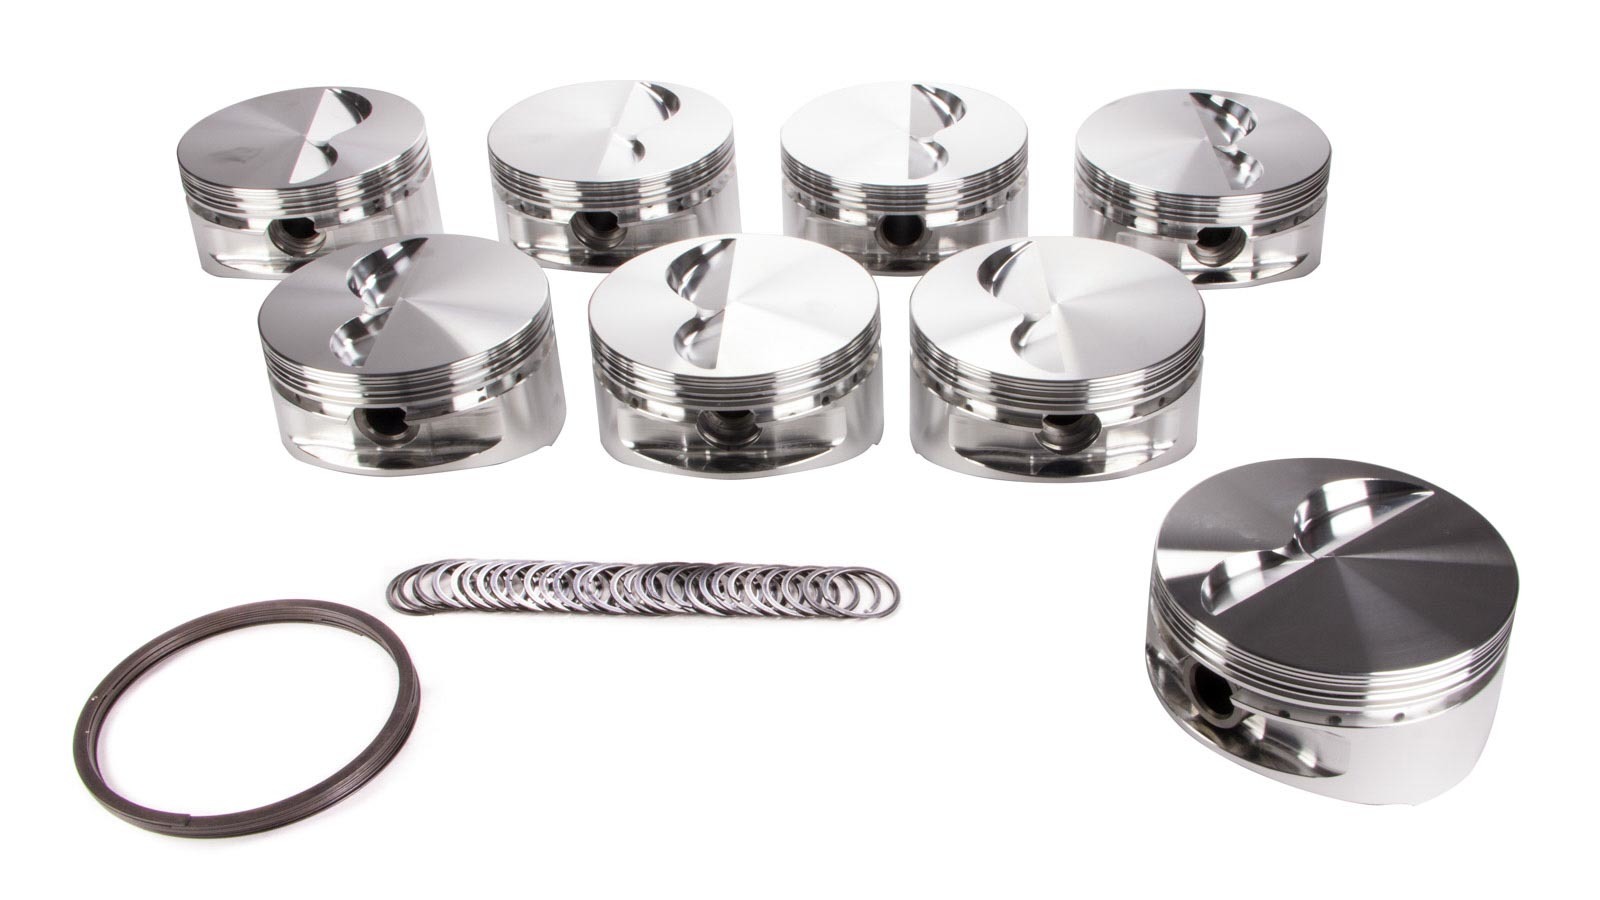 JE Pistons 242886 Piston, Small Block Flat Top, Forged, 4.125 in Bore, 1/16 x 1/16 x 3/16 in Ring Grooves, Minus 5.00 cc, Small Block Chevy, Set of 8